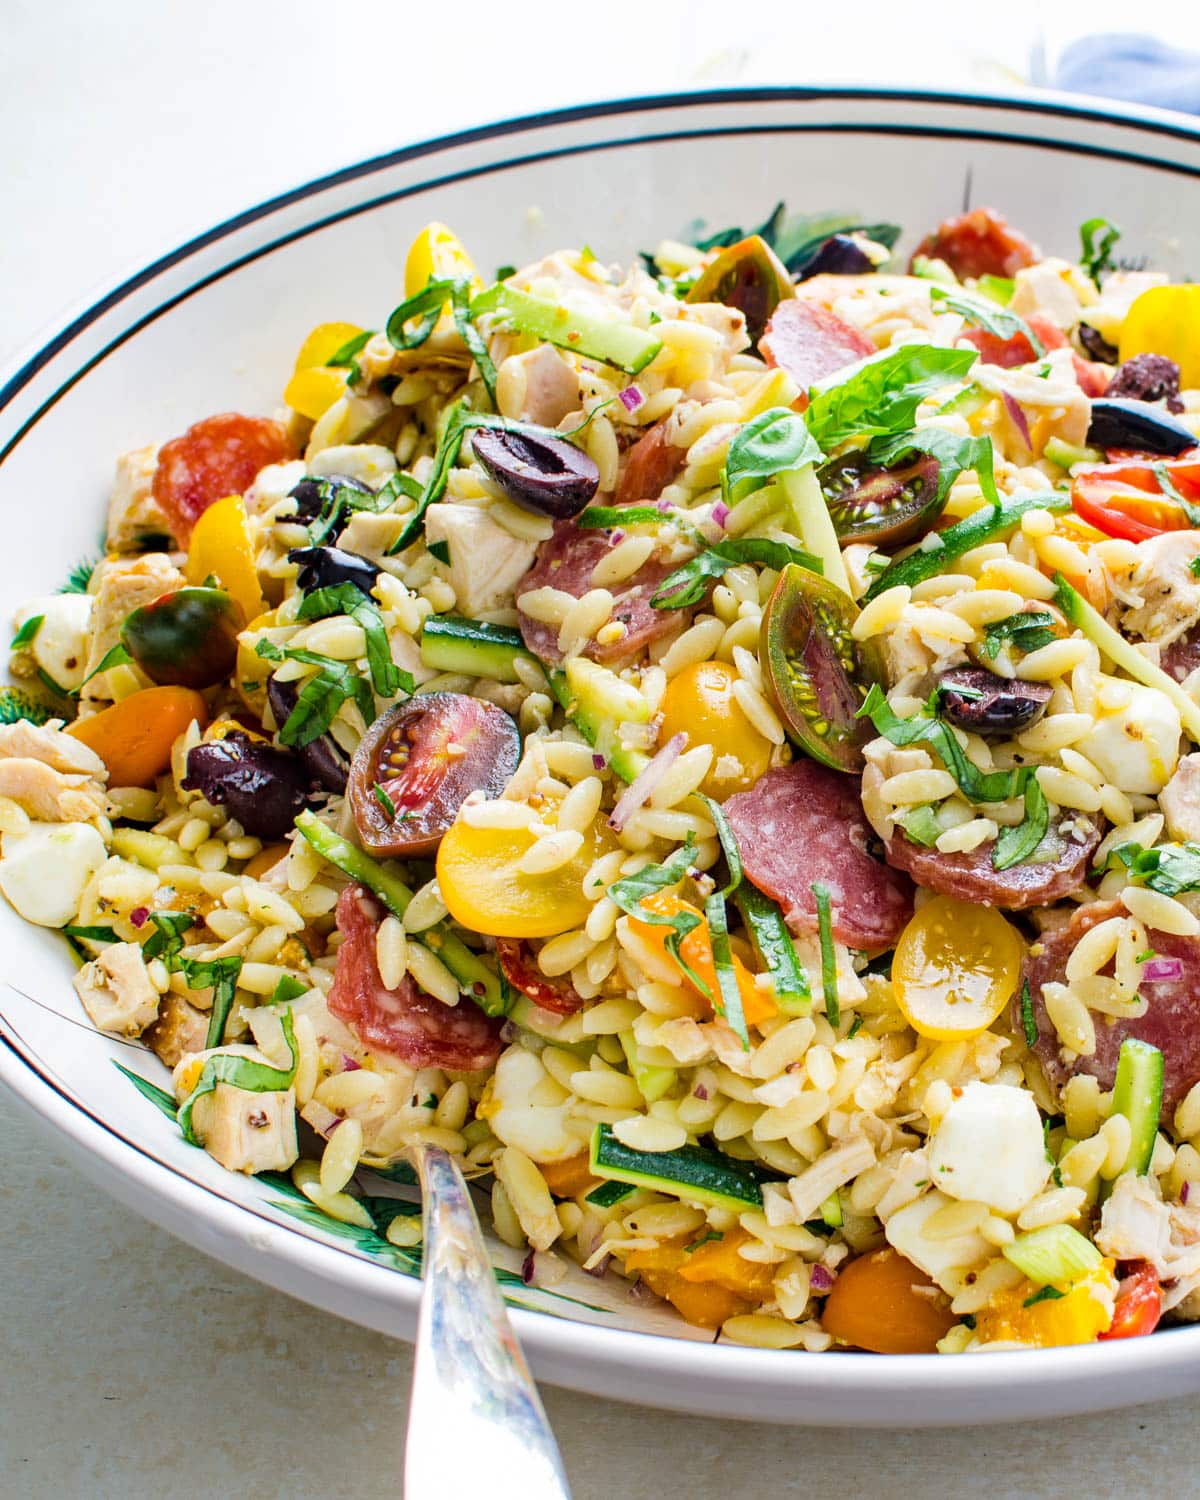 orzo chicken salad with pepperoni and veggies in a bowl.